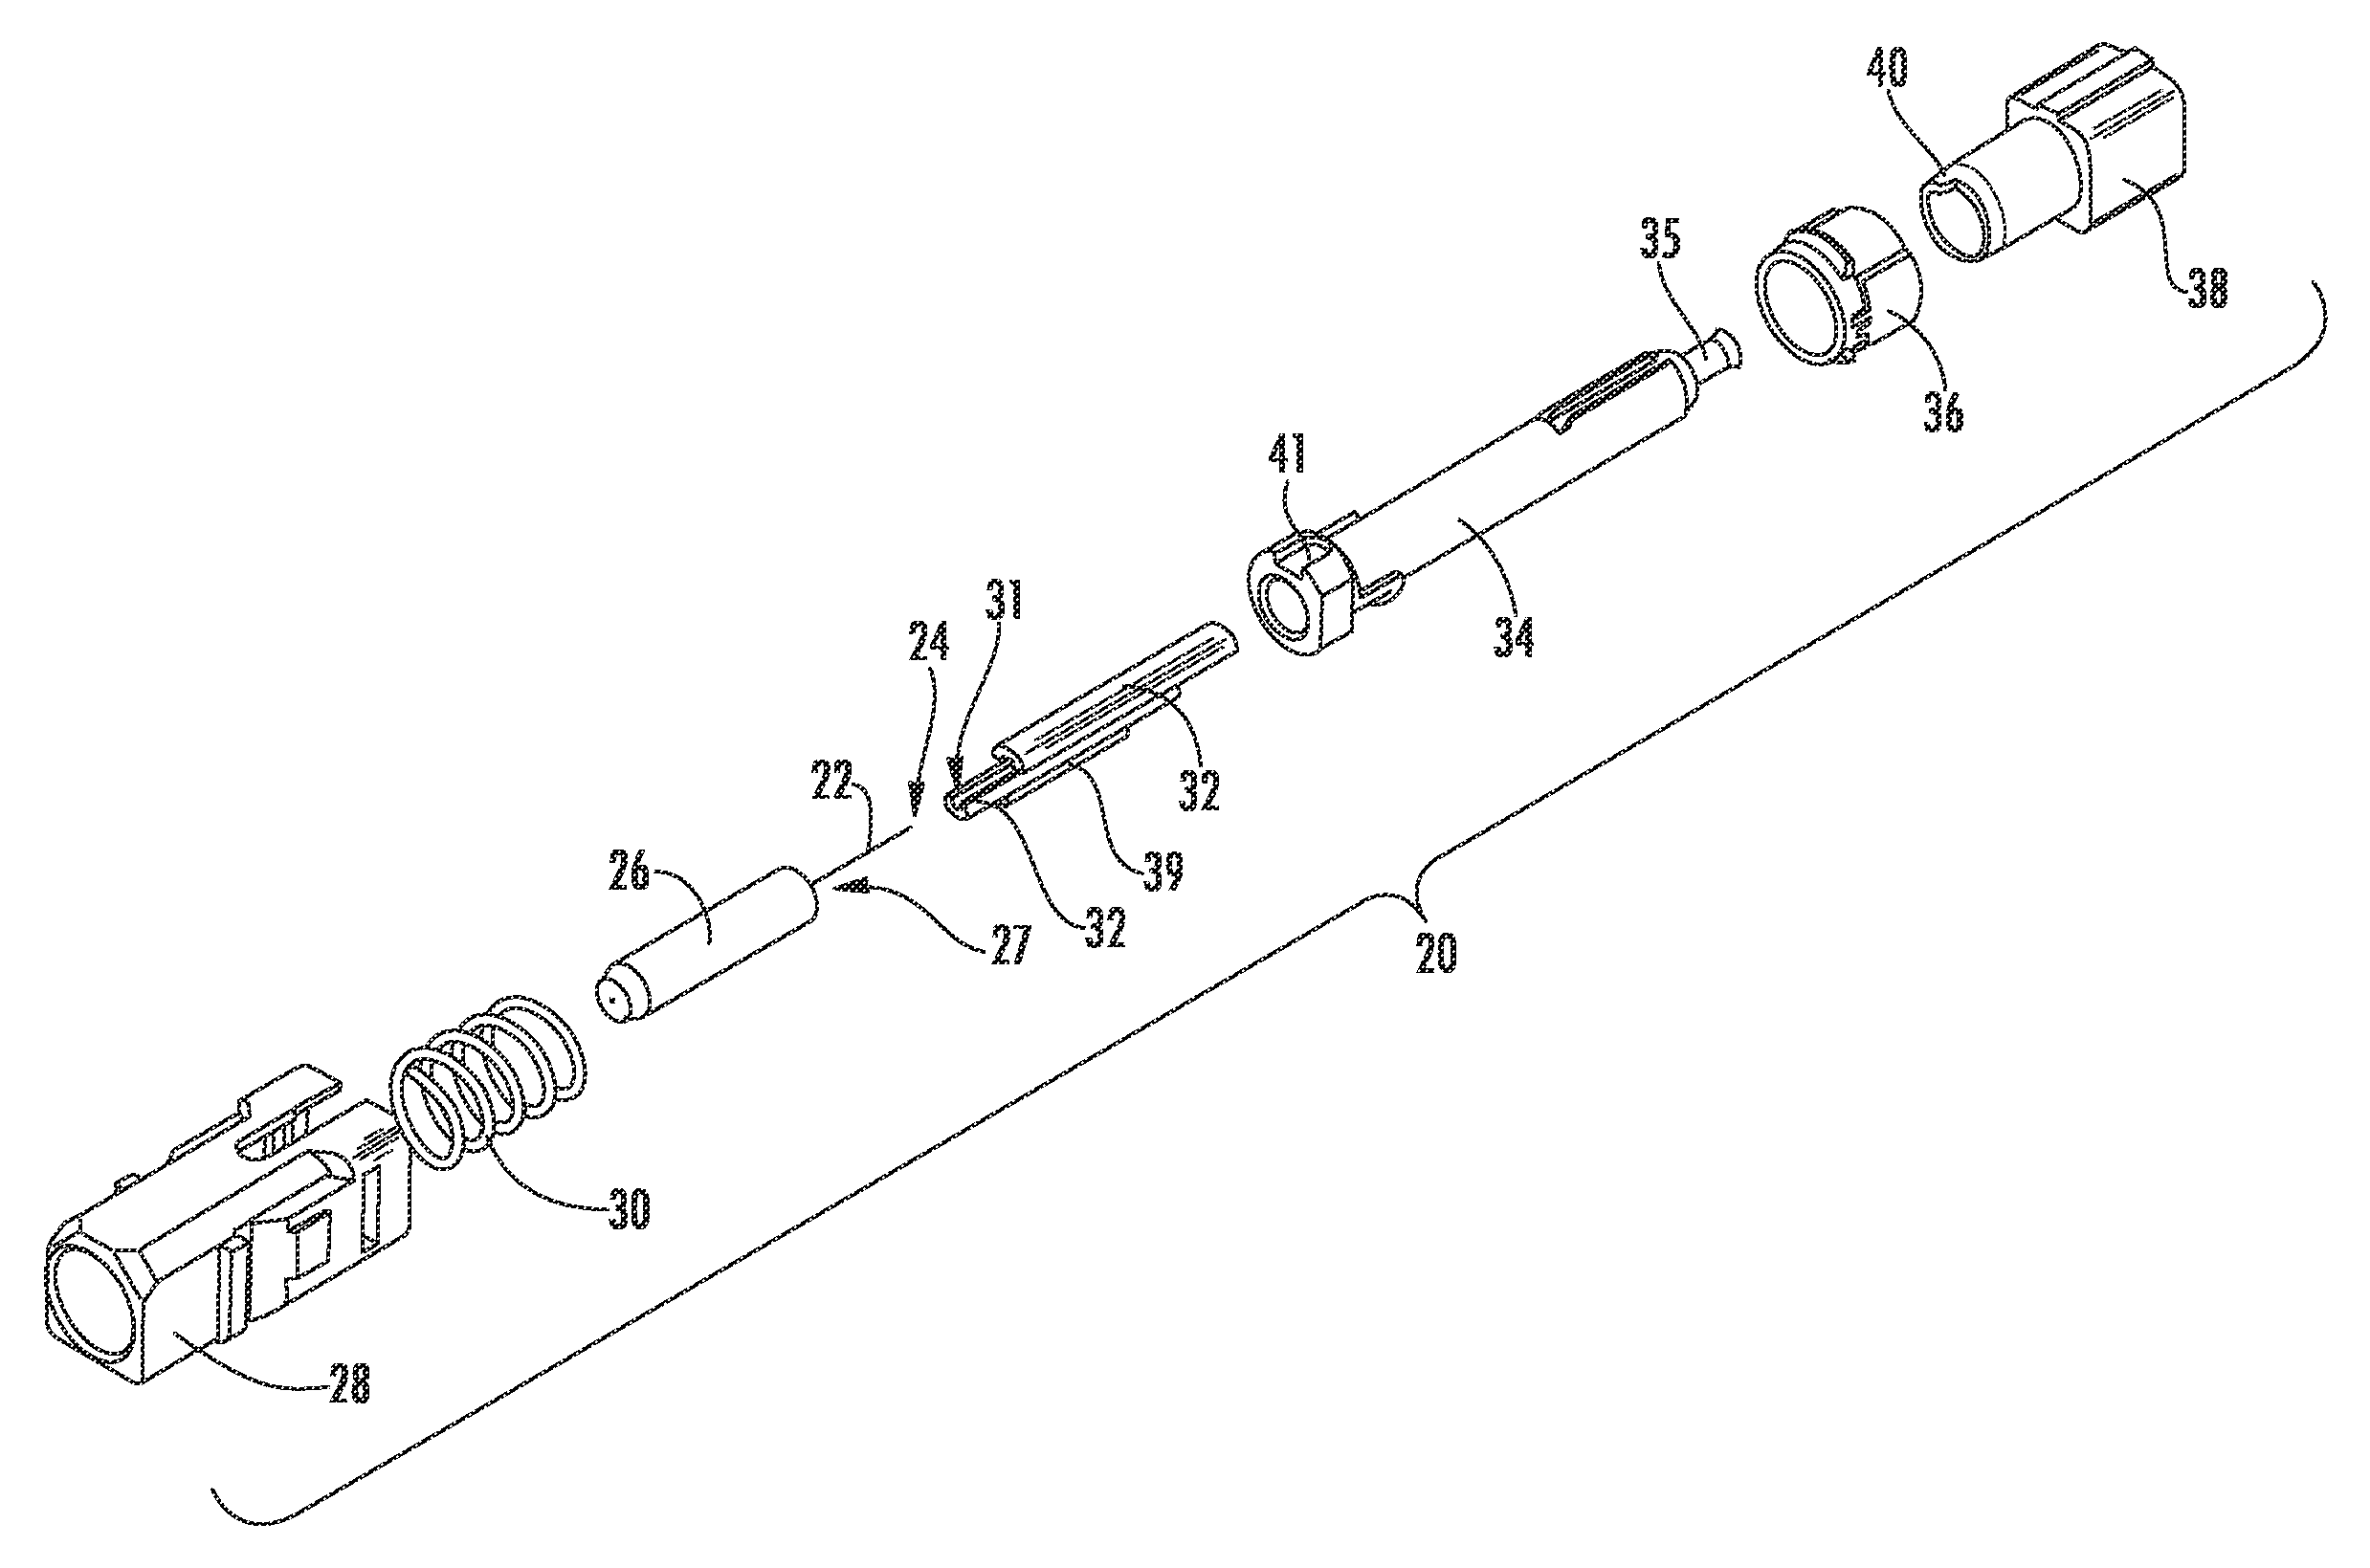 Laser-Shaped Optical Fibers Along with Optical Assemblies and Methods Therefor